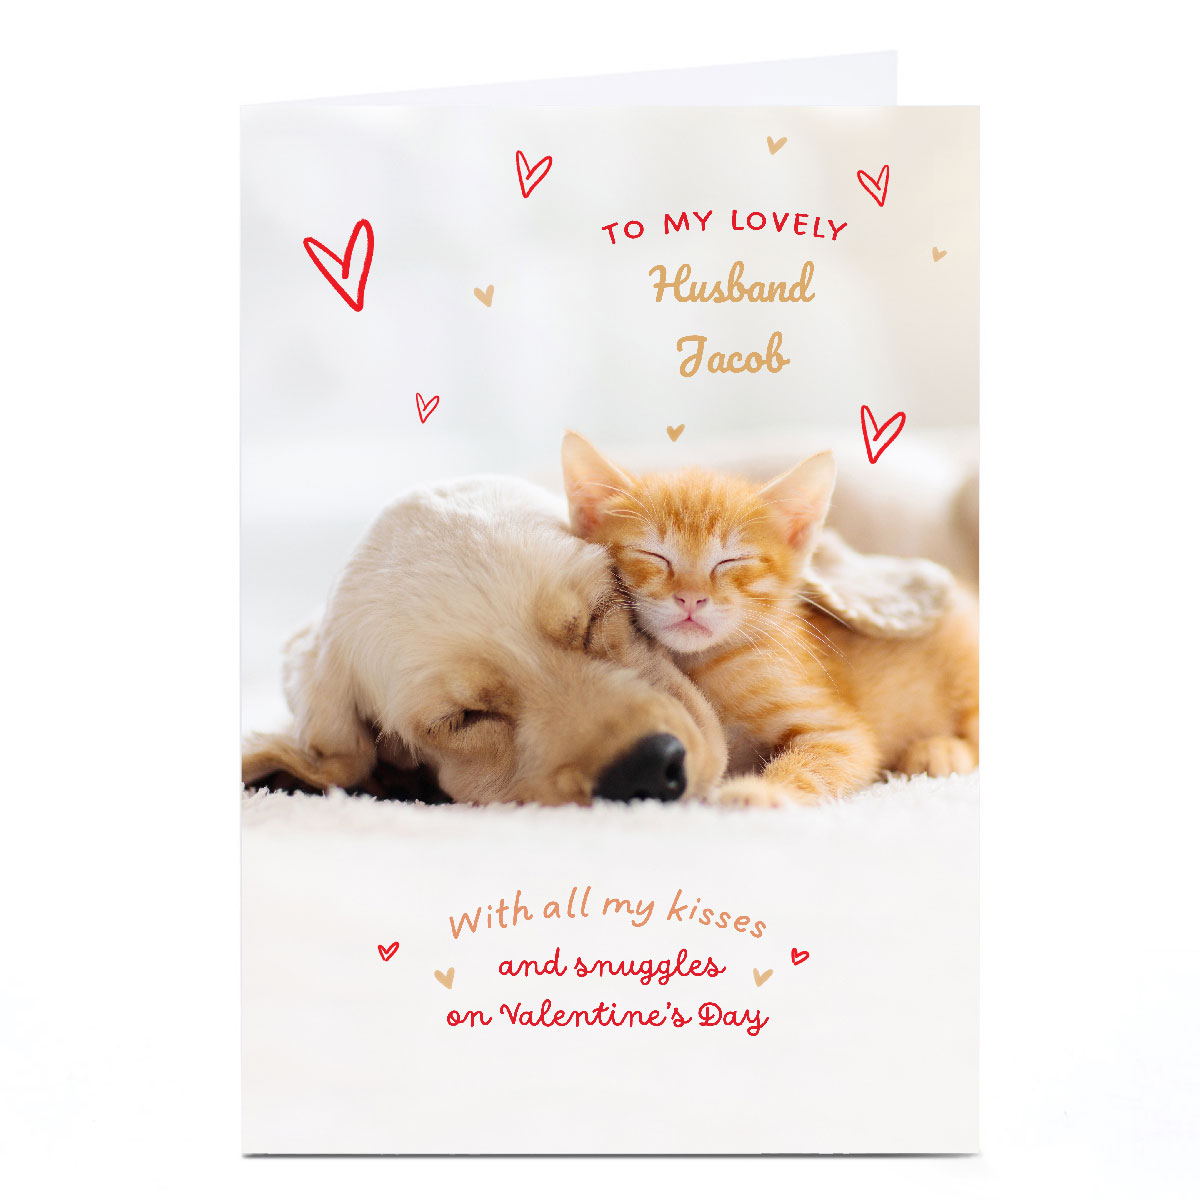 Personalised Valentine's Day Card - Puppy and Kitten Snuggles, Husband